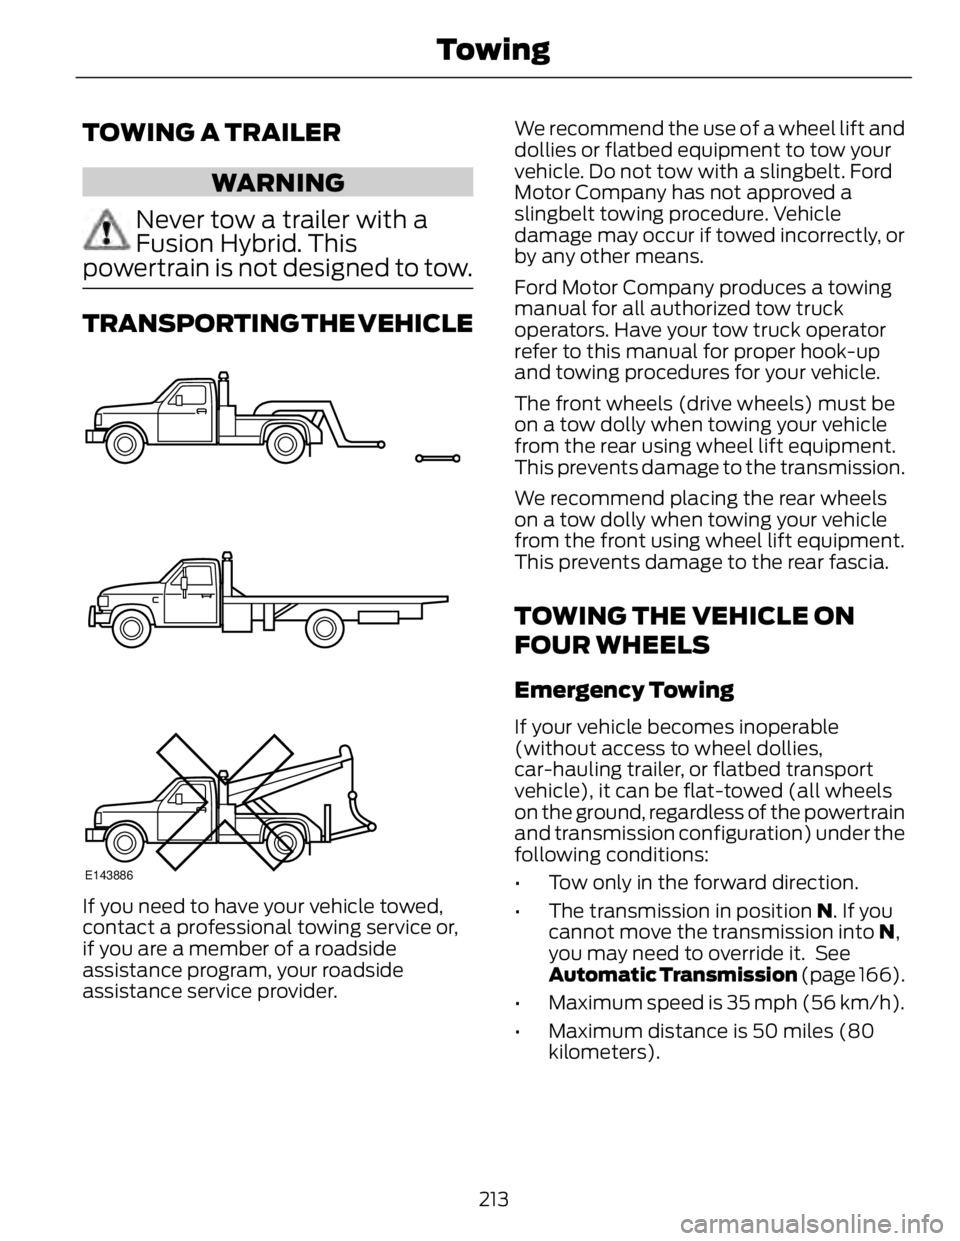 FORD FUSION HYBRID 2014  Owners Manual TOWING A TRAILER
WARNING
Never tow a trailer with a
Fusion Hybrid. This
powertrain is not designed to tow.
TRANSPORTING THE VEHICLE
E143886
If you need to have your vehicle towed,
contact a profession